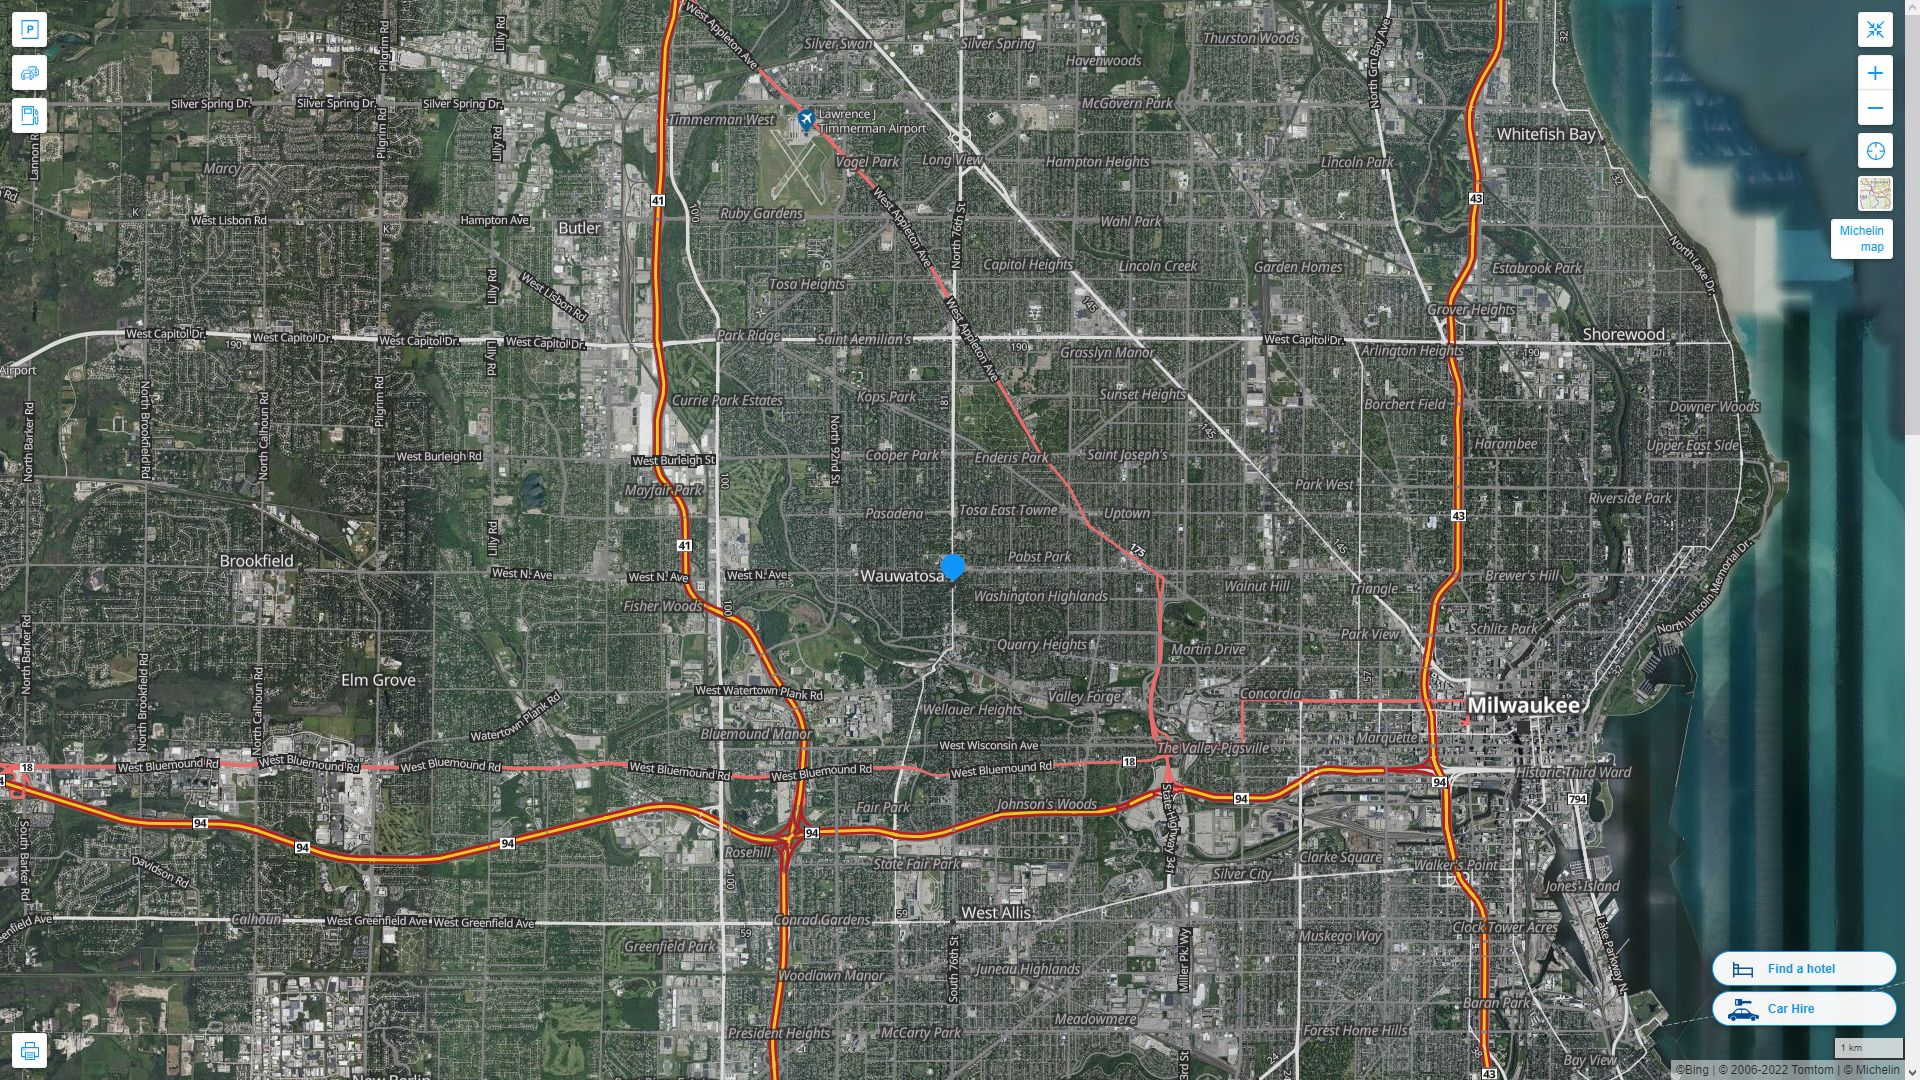 Wauwatosa Wisconsin Highway and Road Map with Satellite View